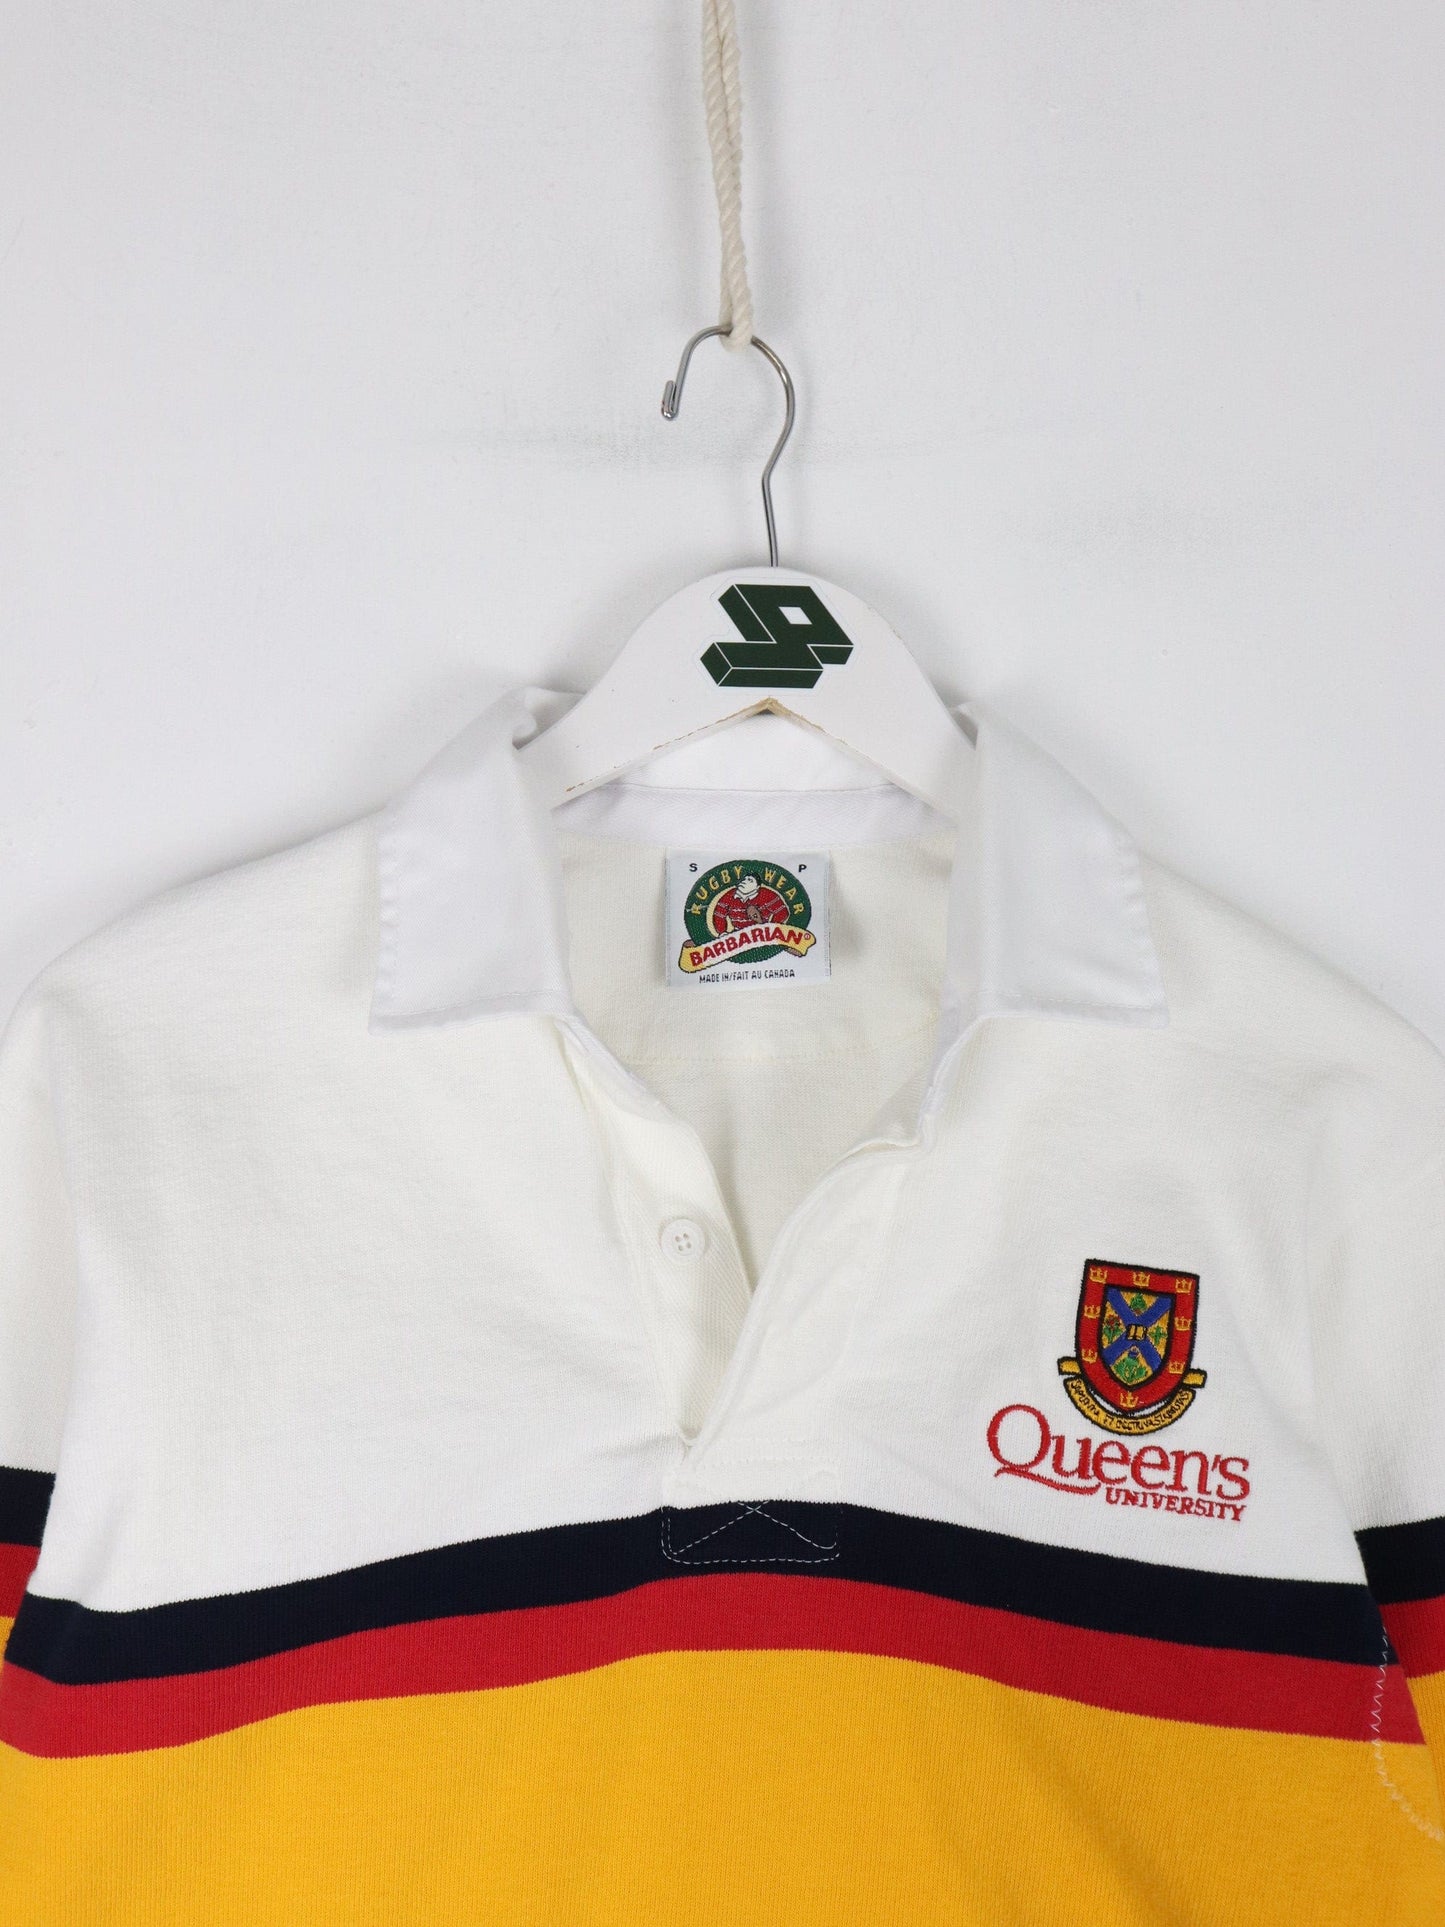 Collegiate Button Up Shirts Queen's University Shirt Mens Small White College Rugby